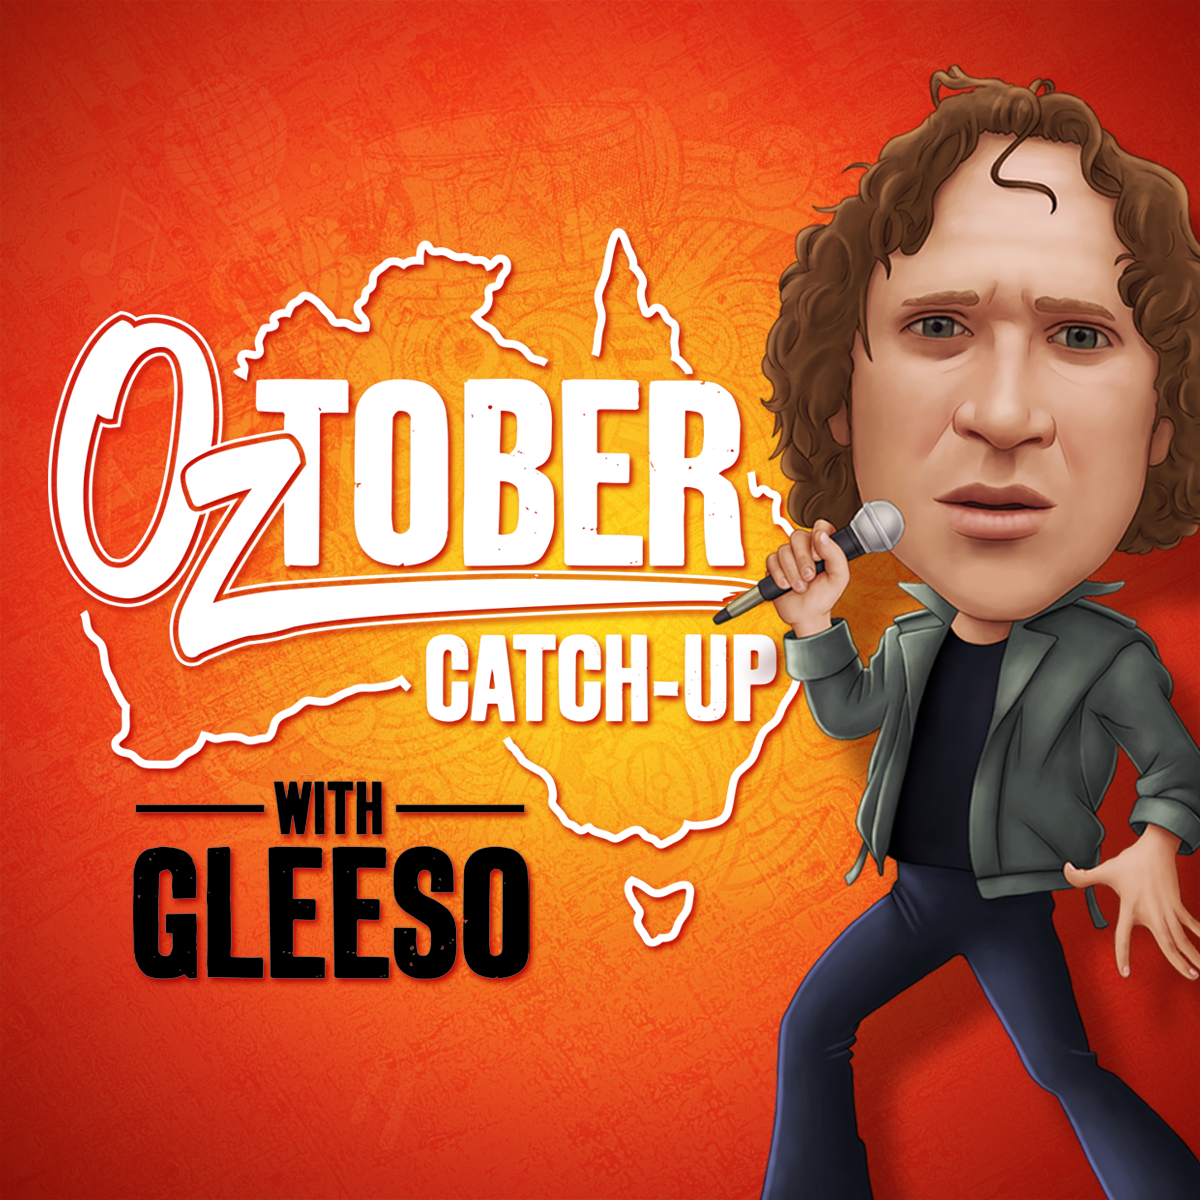 Oztober Catch-Up with Gleeso - Ian Moss from Cold Chisel